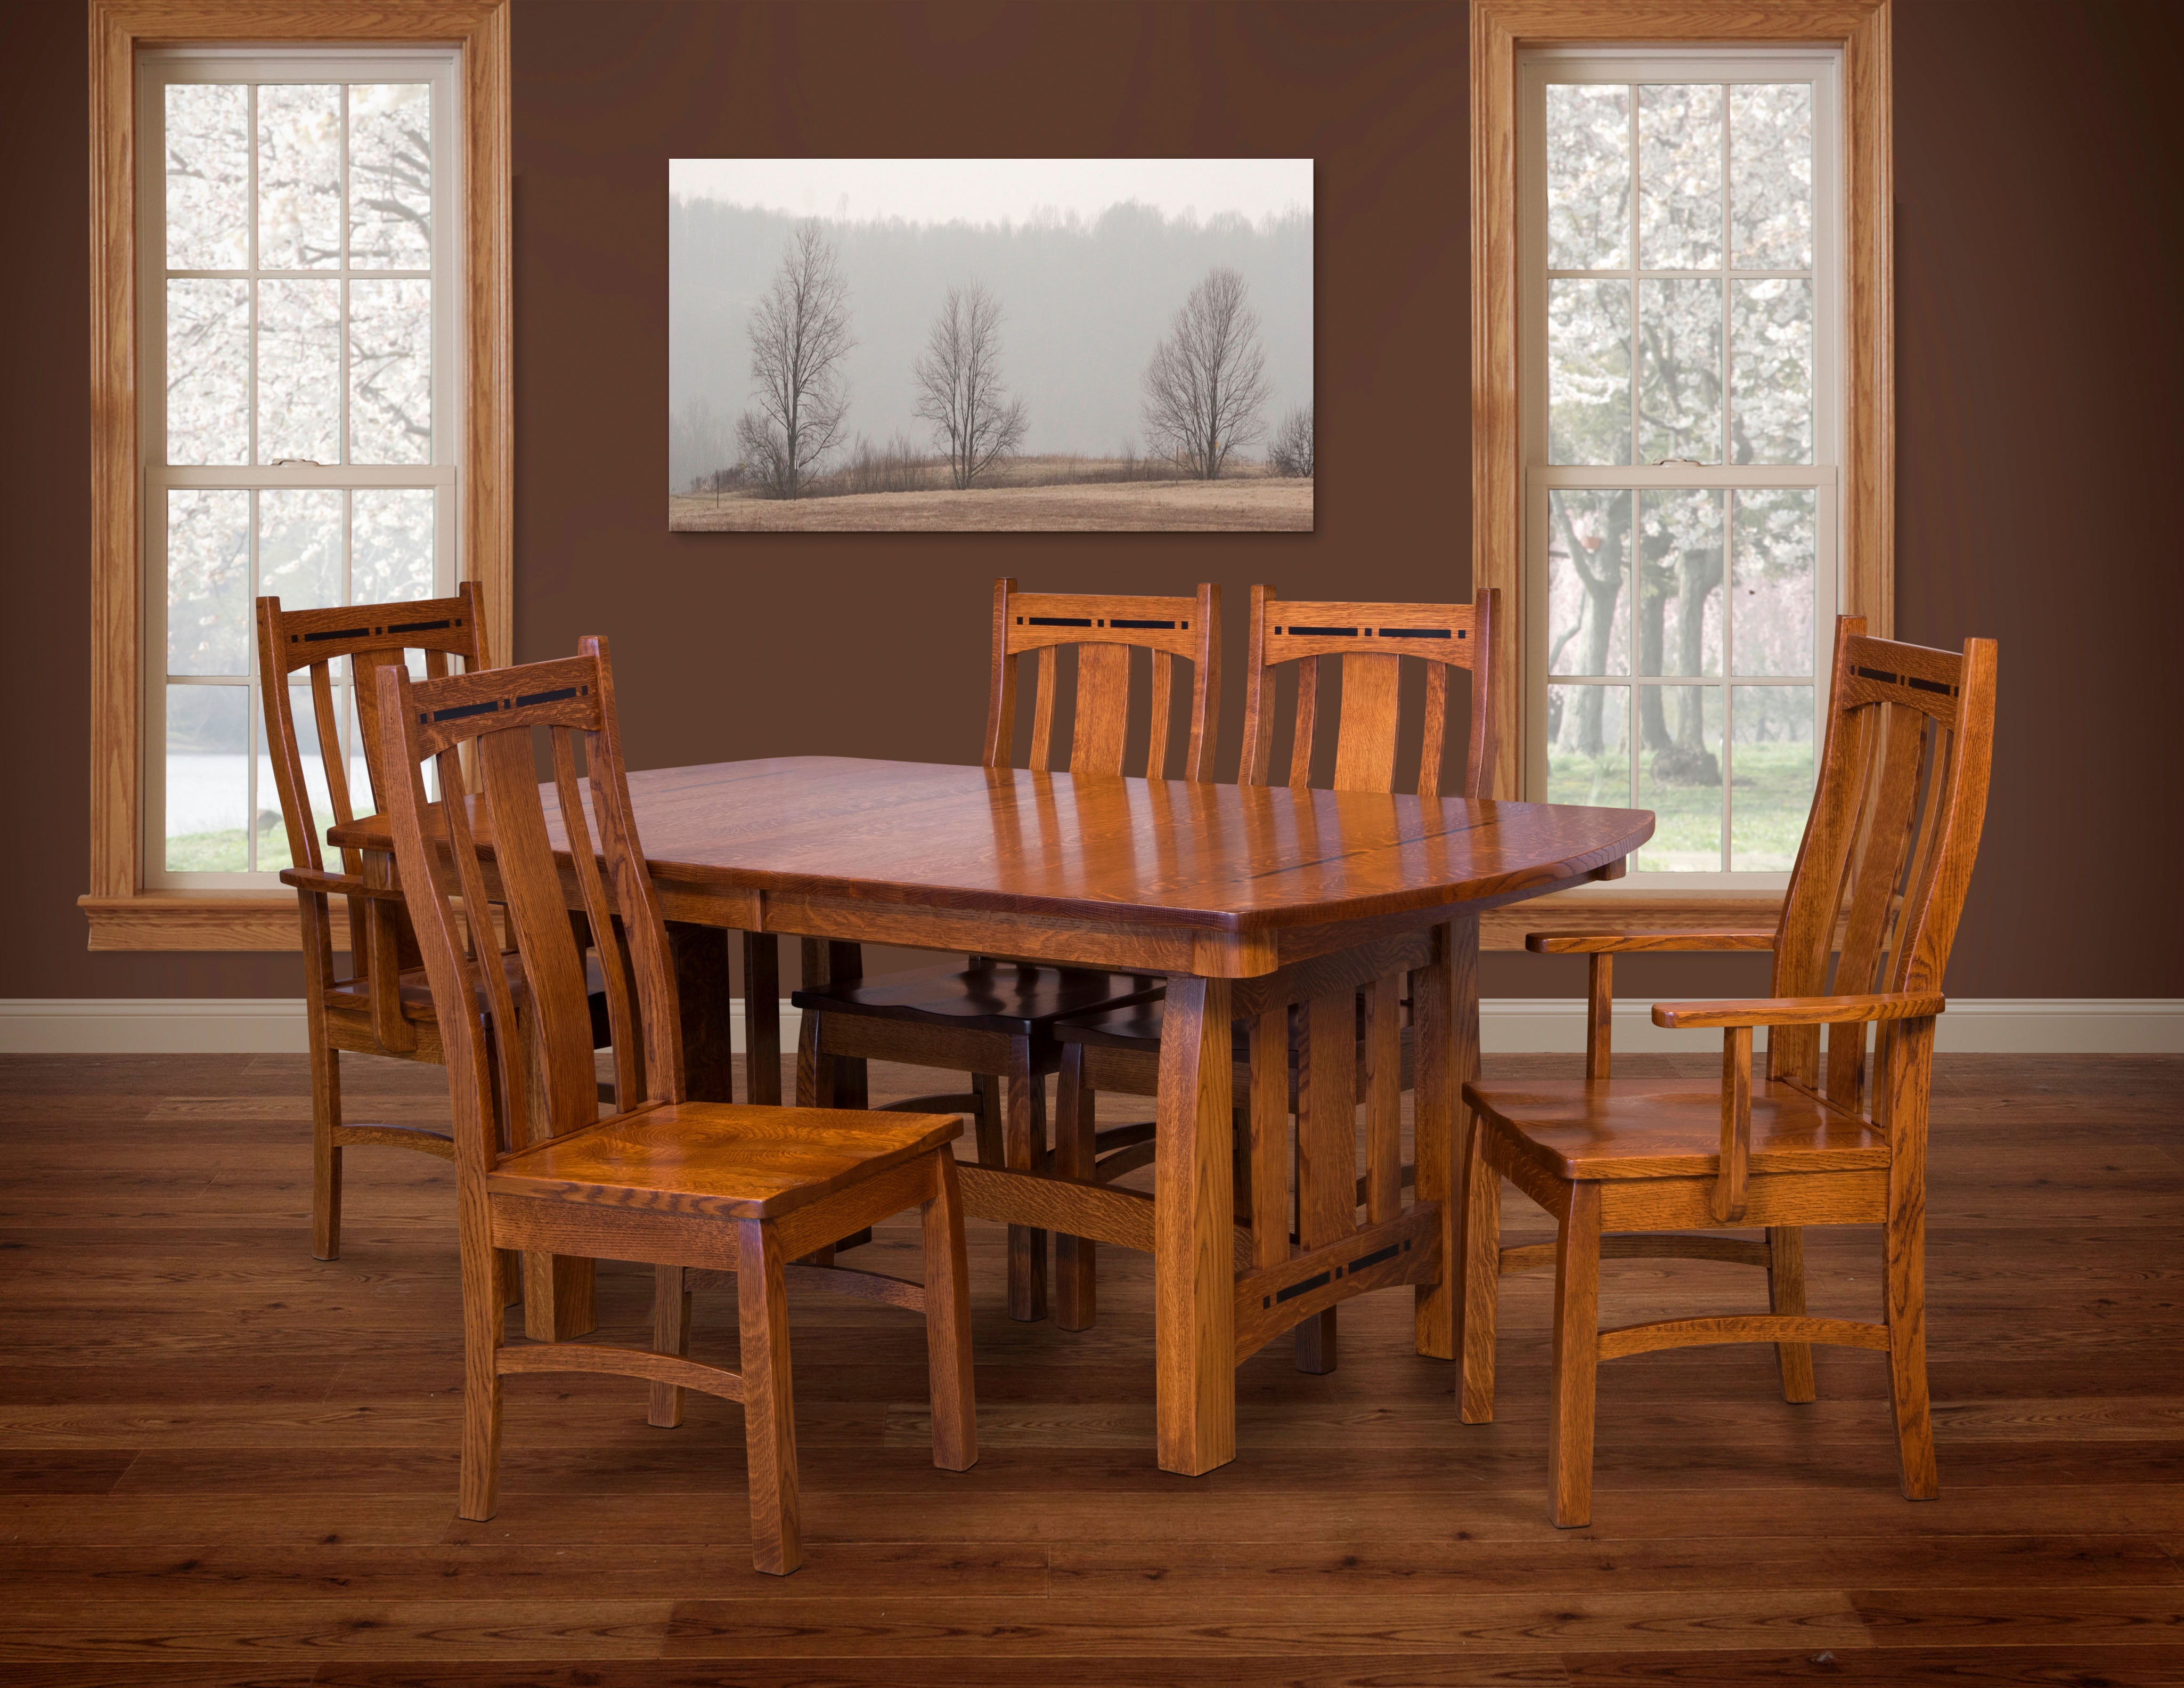 Amish Boulder Creek Dining Chair